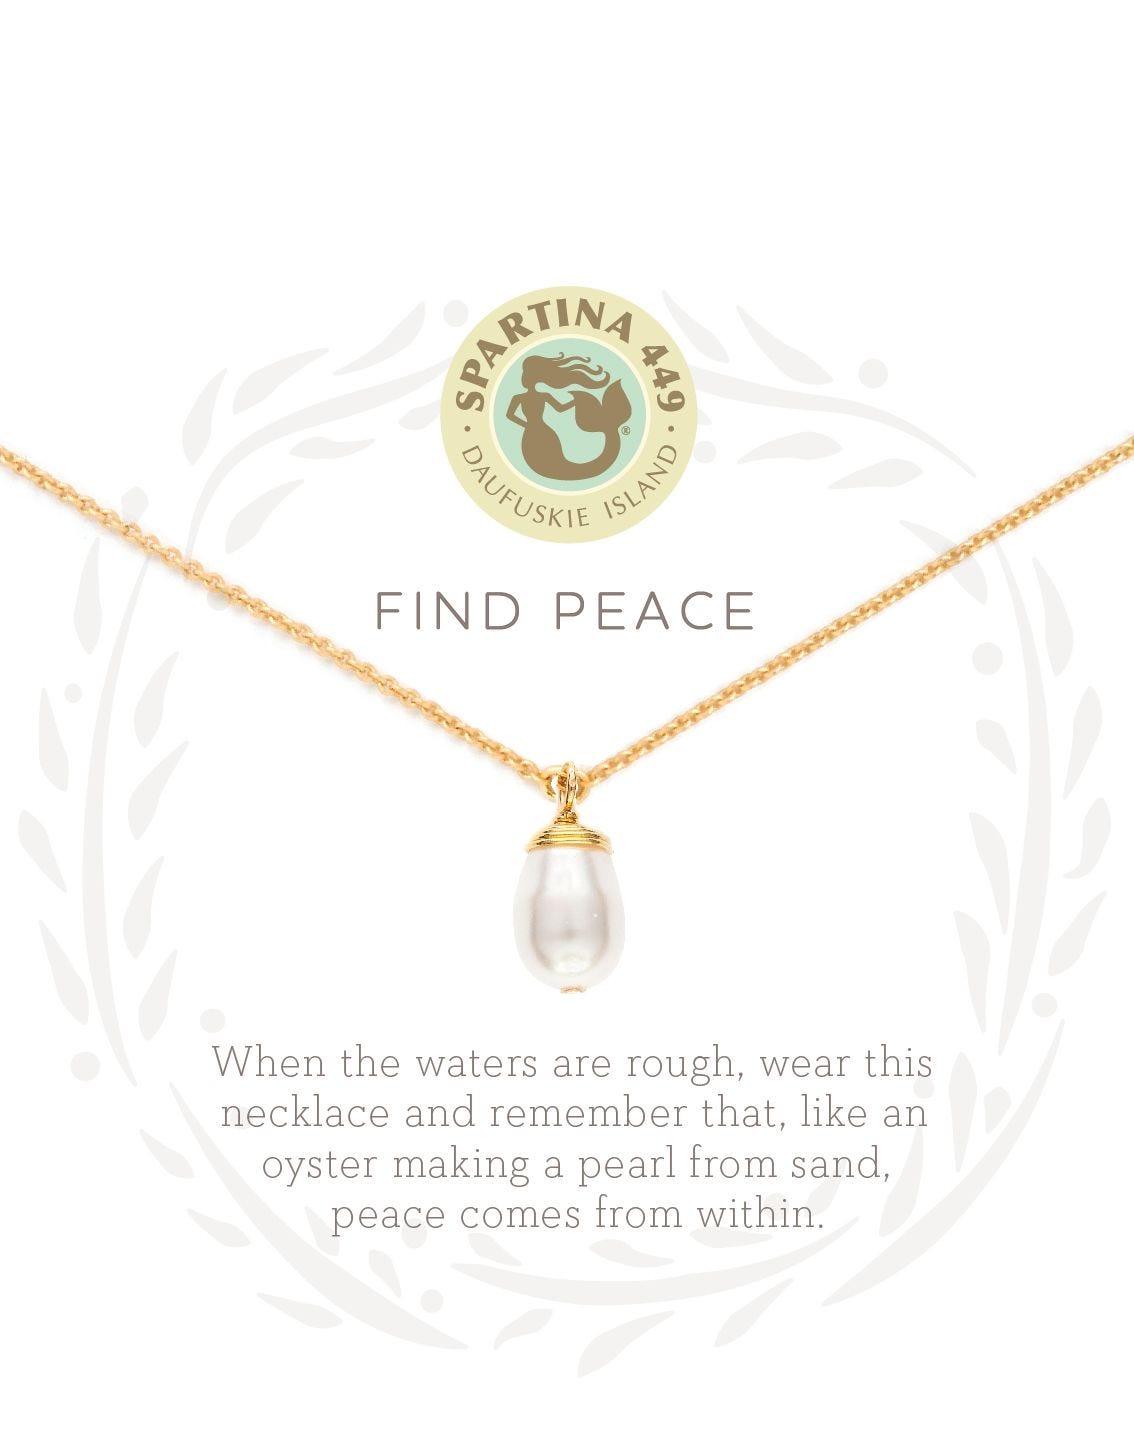 Find Peace Necklace - The Silver Dahlia